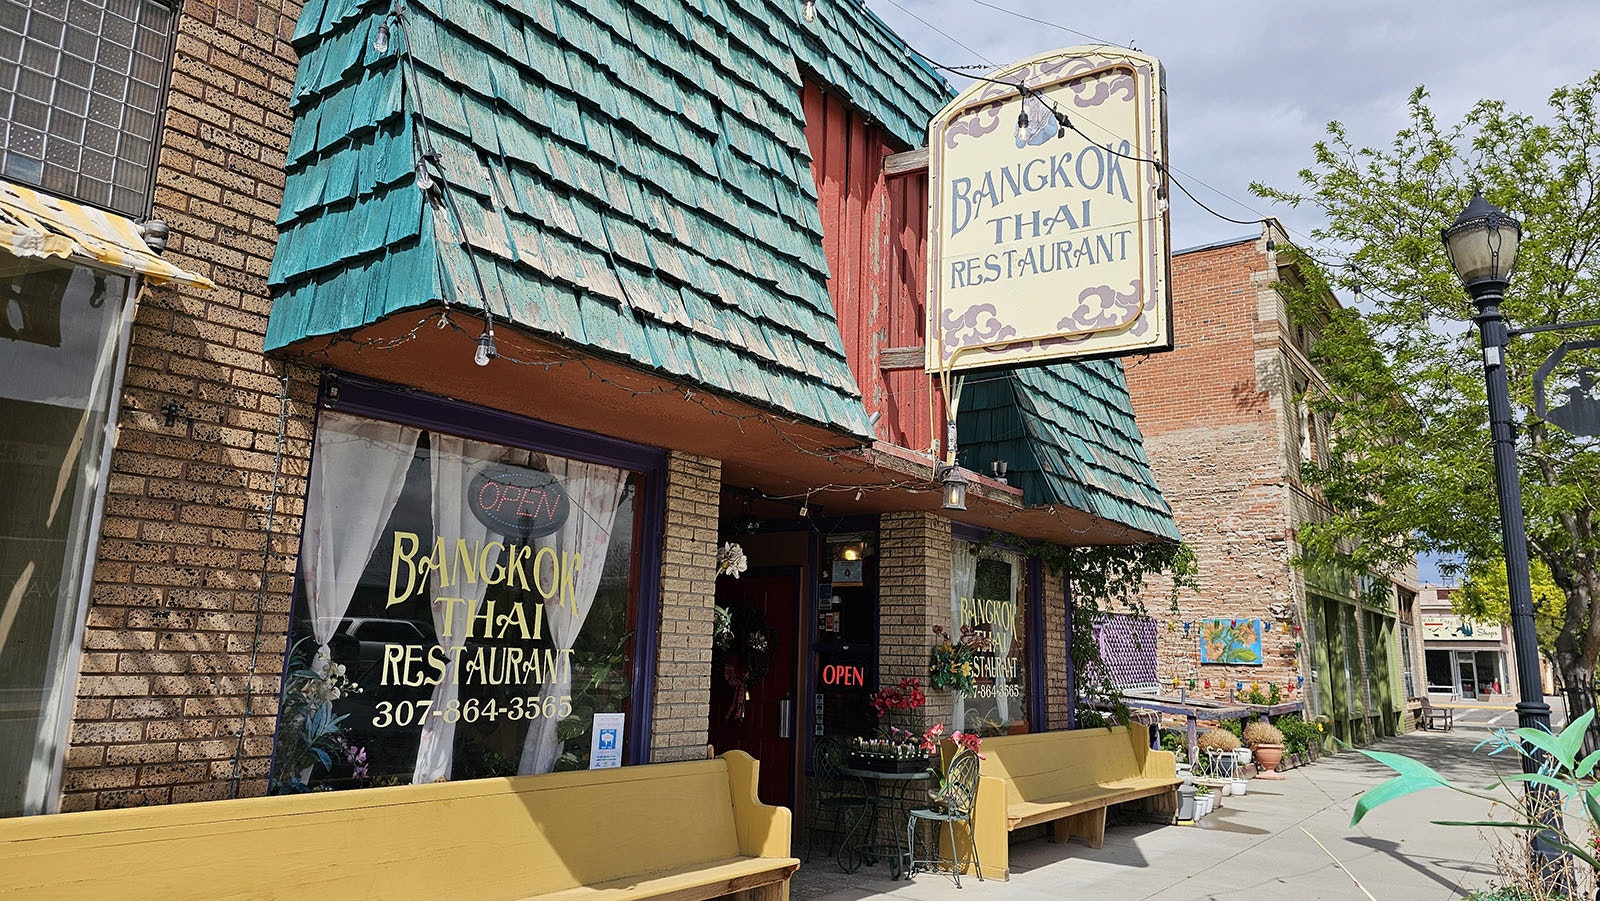 Exterior of Bangkok Thai in Thermopolis, which is run by two brothers form Thailand.